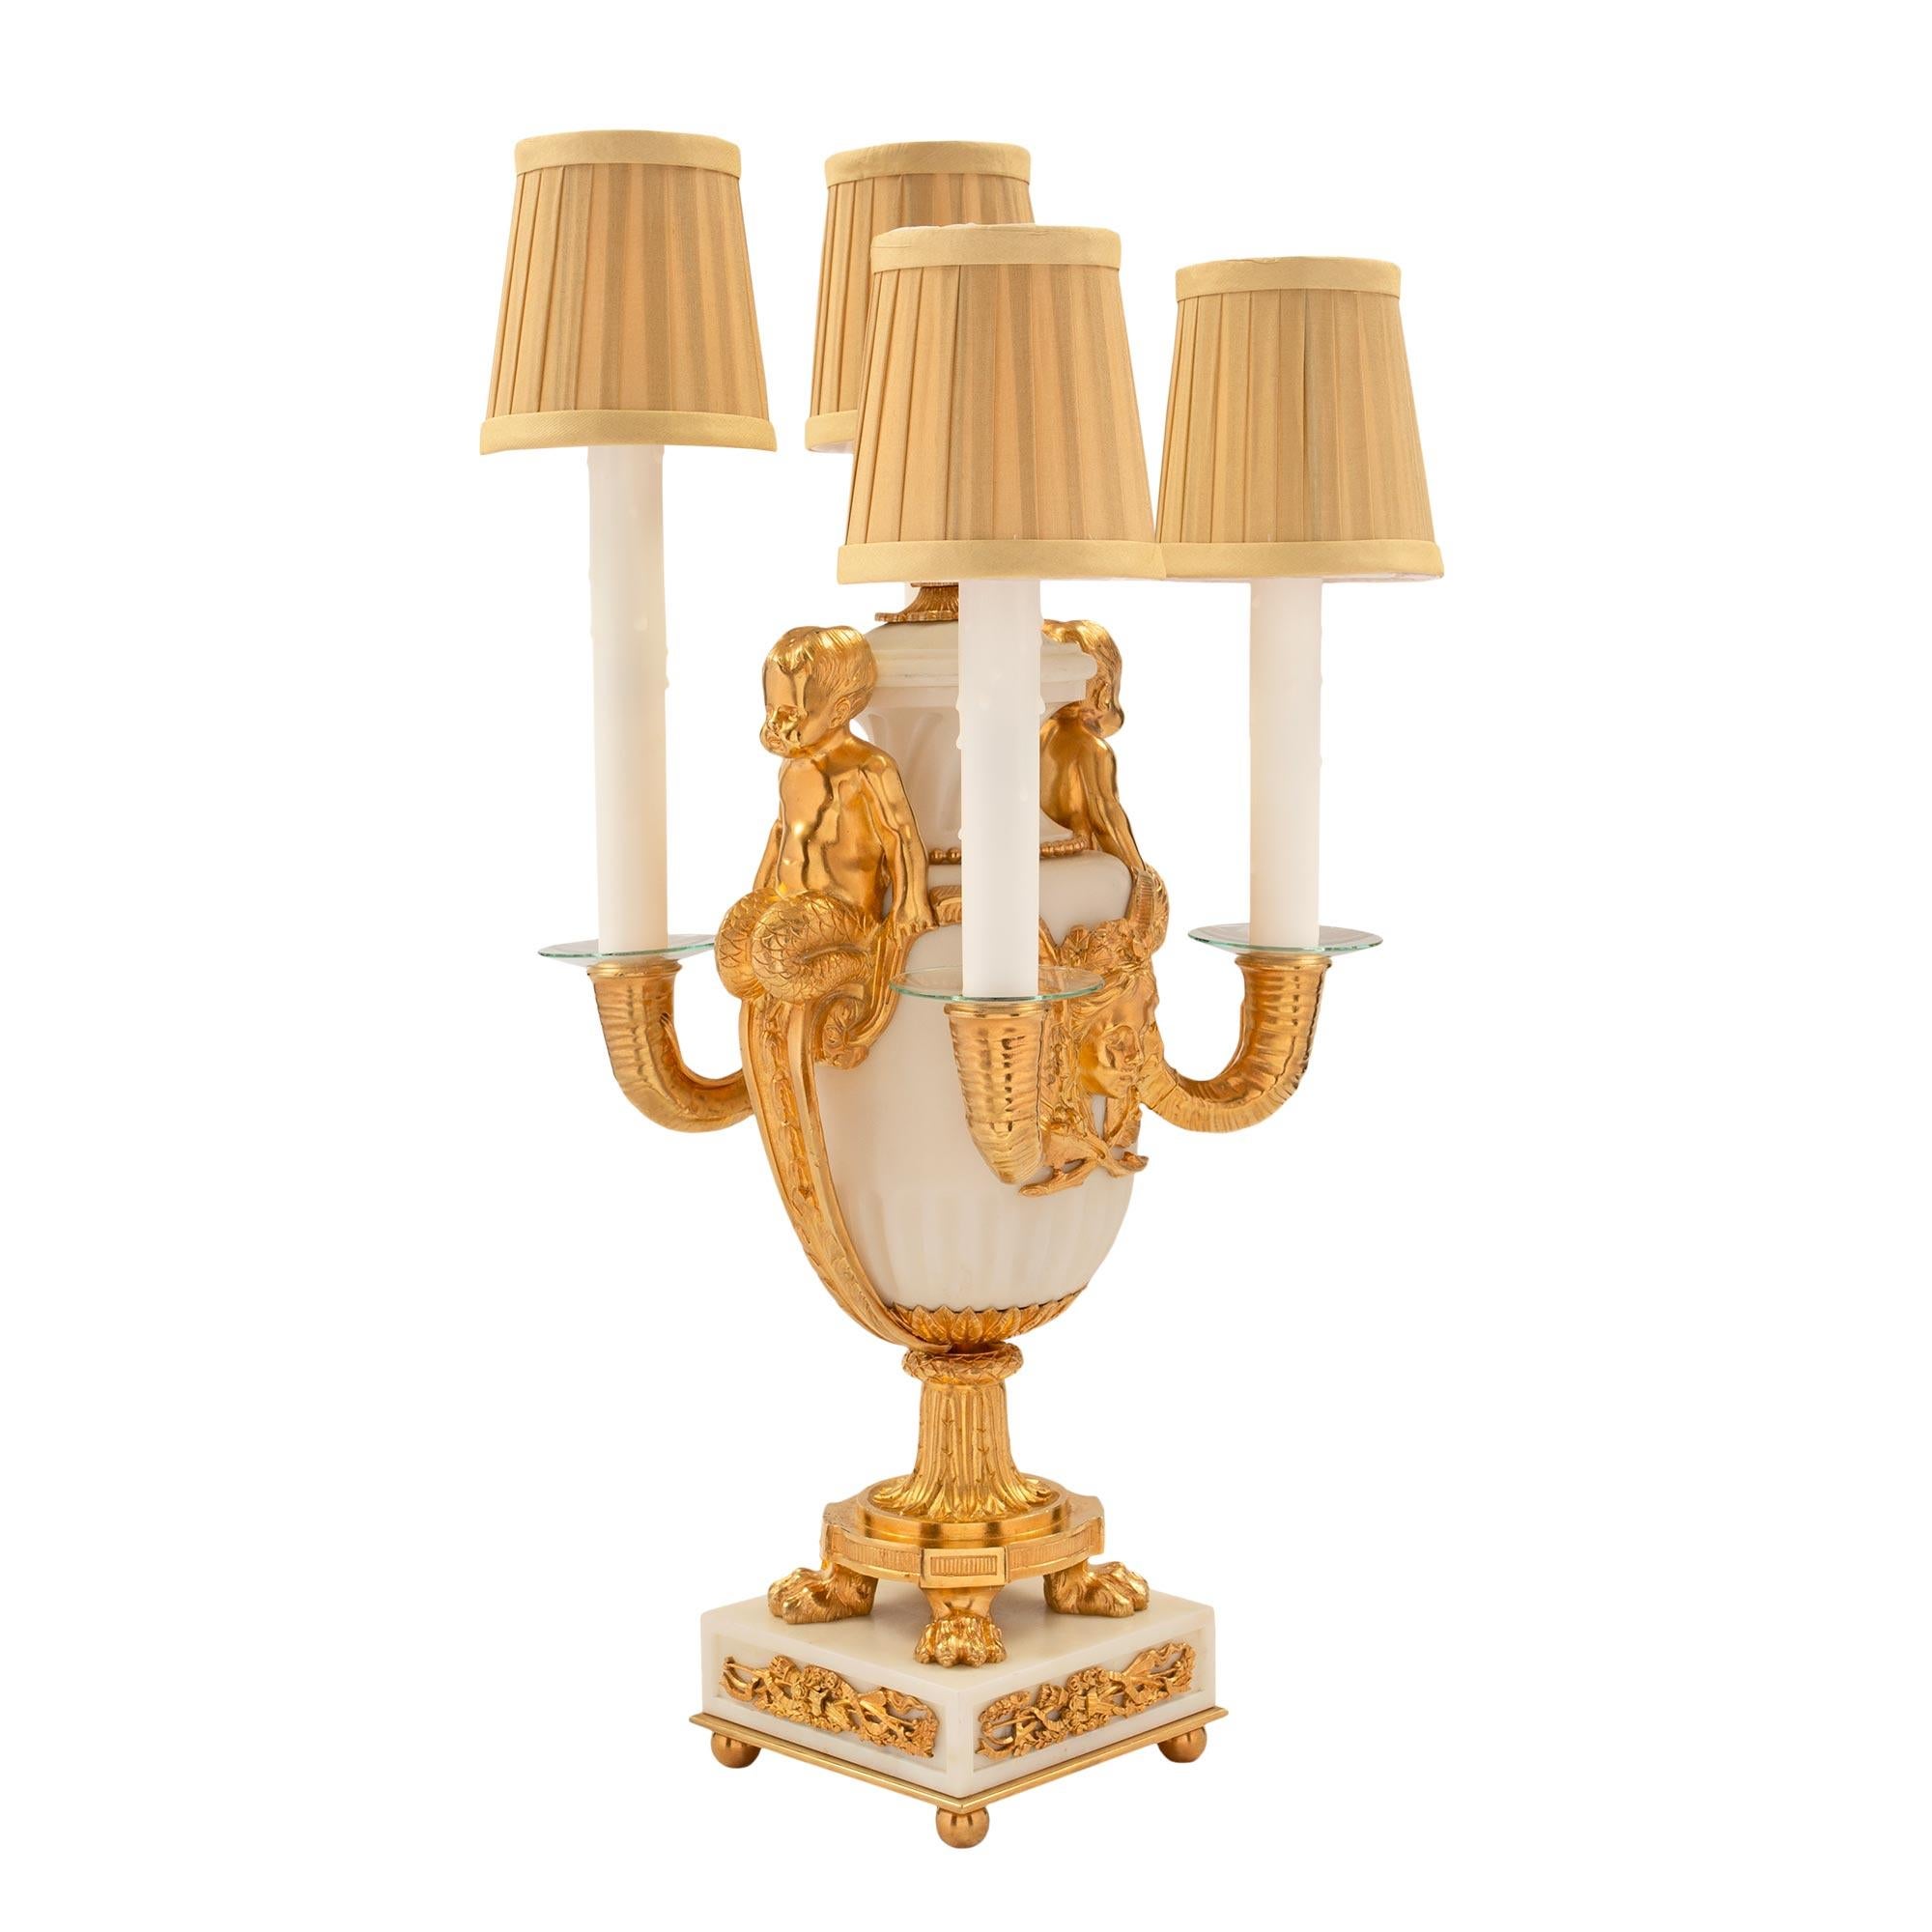 A stunning and most unique pair of French 19th century Louis XVI st. Belle Époque period white Carrara marble and ormolu four arm electrified candelabra lamps, possibly by Henry Dasson. Each lamp is raised by a square white Carrara marble base with